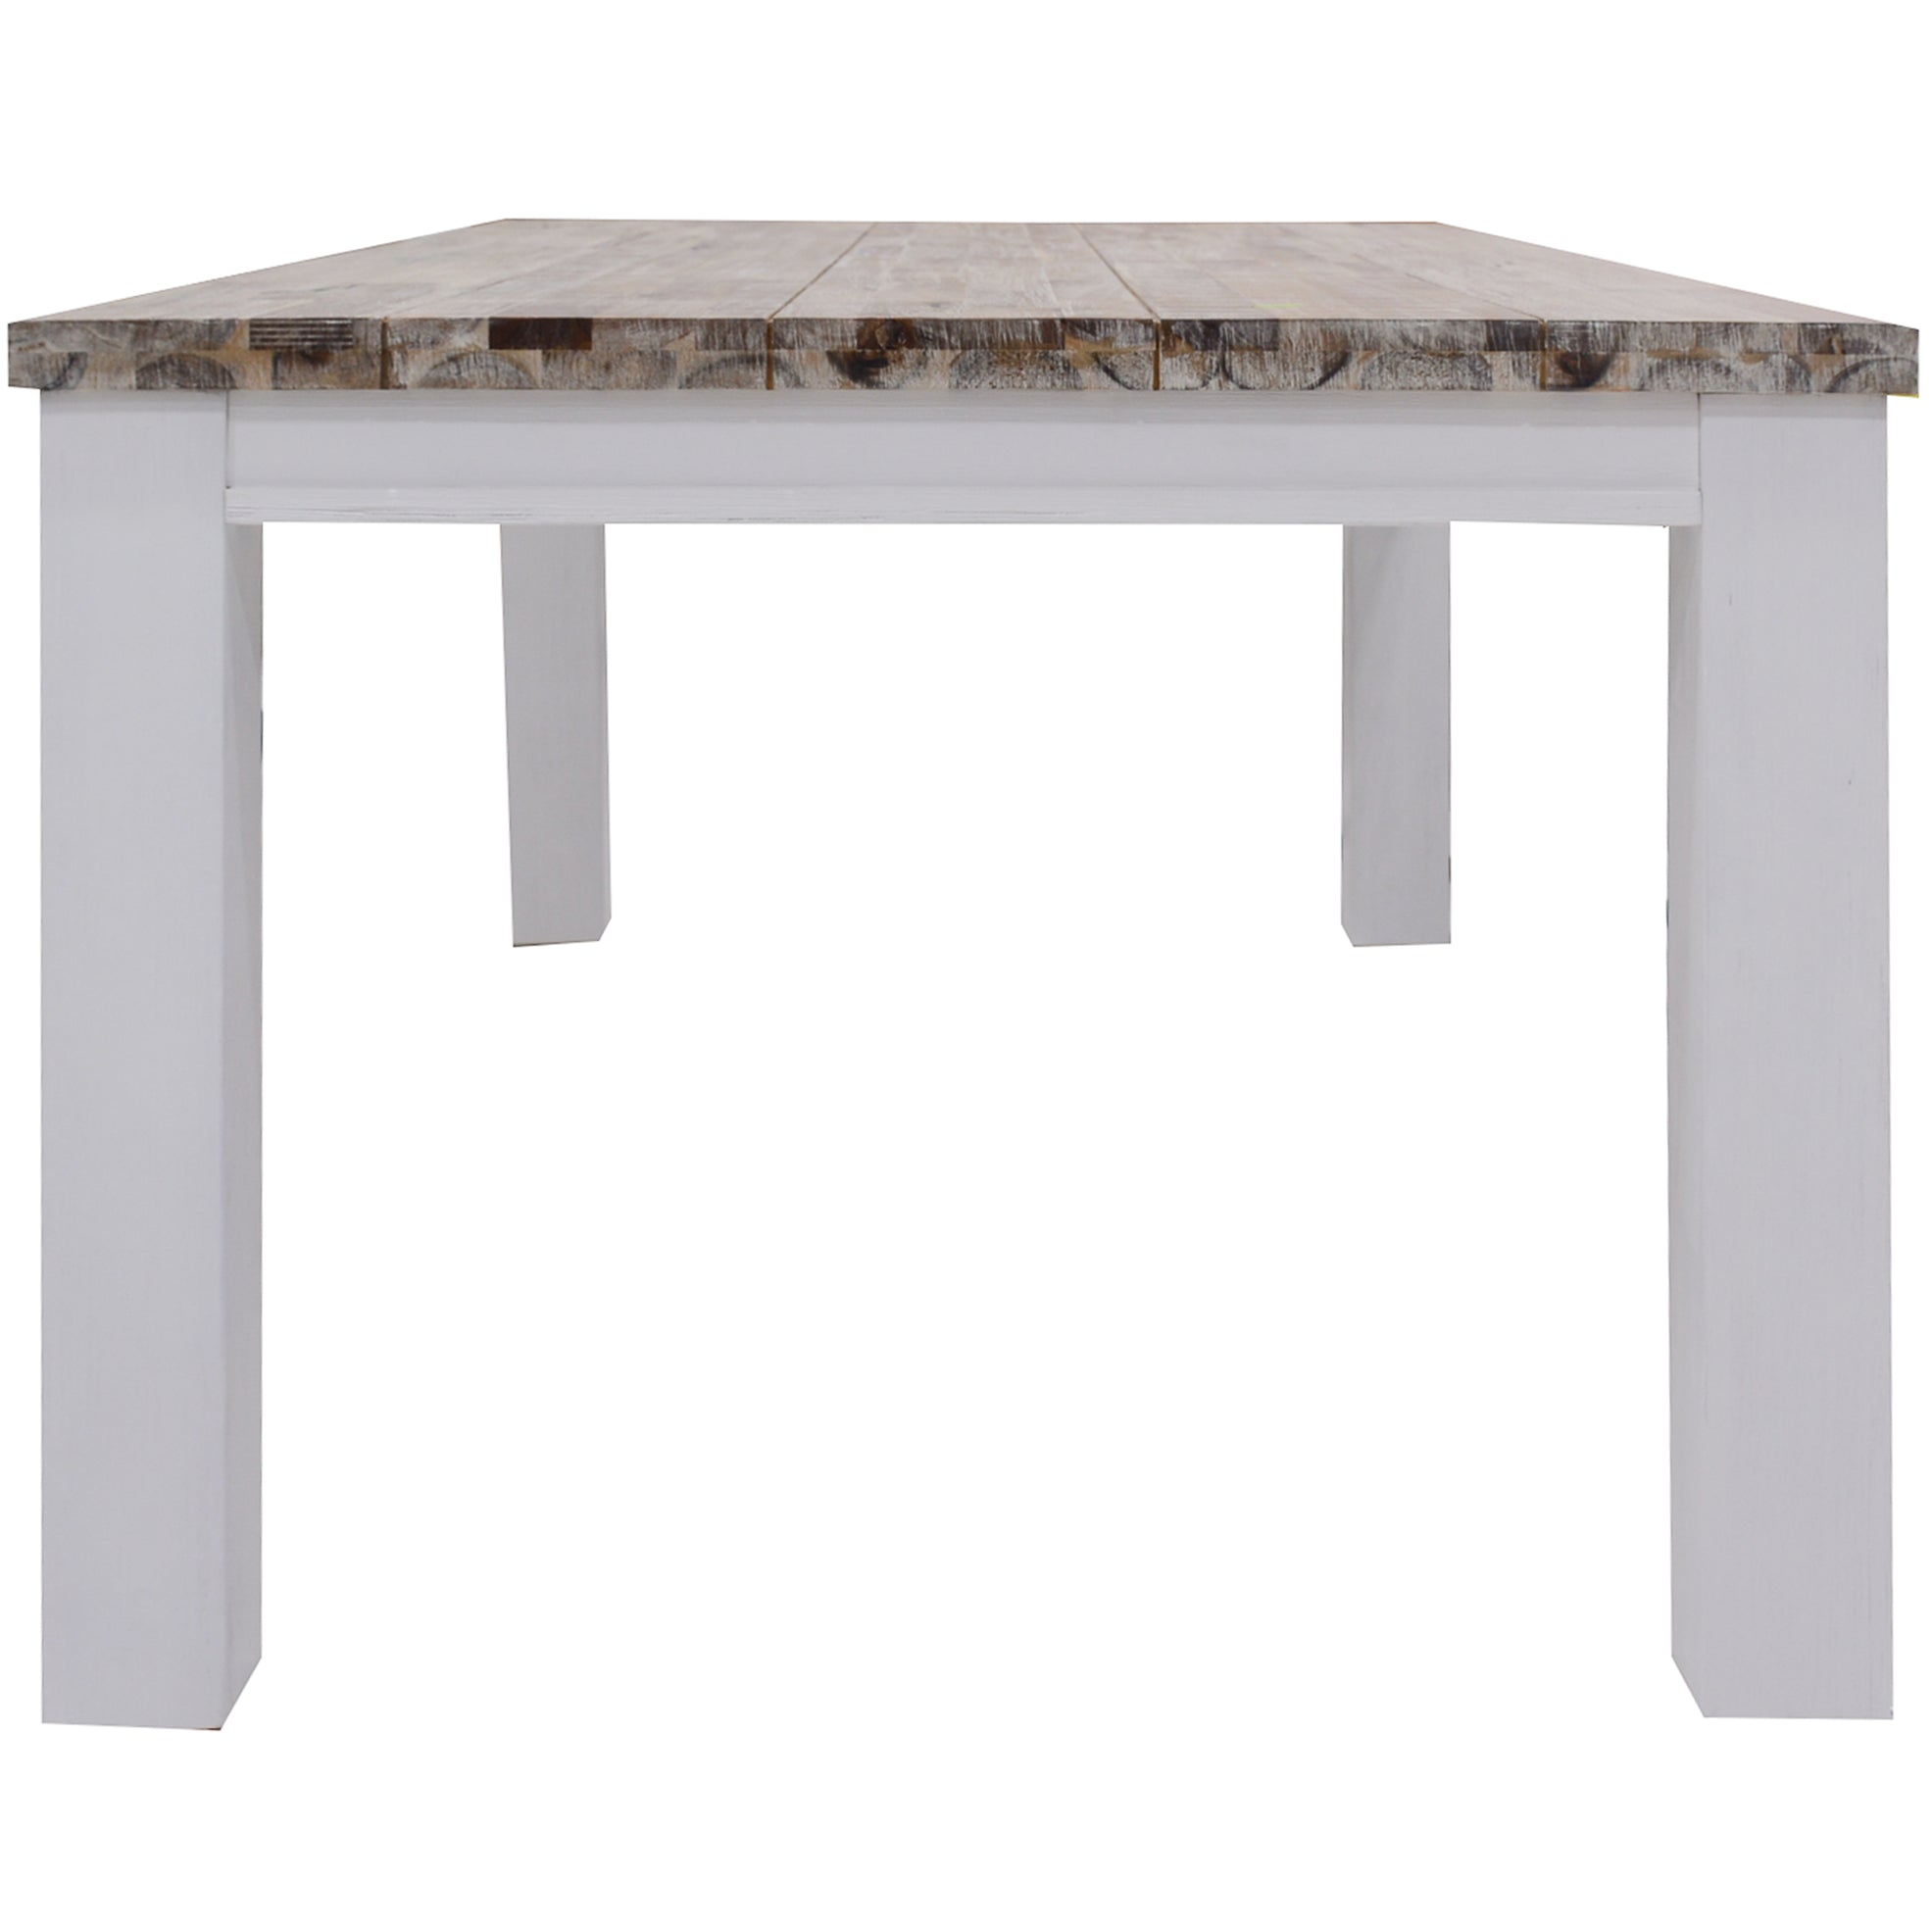 Plumeria Dining Table 190cm Solid Acacia Wood Home Dinner Furniture -White Brush